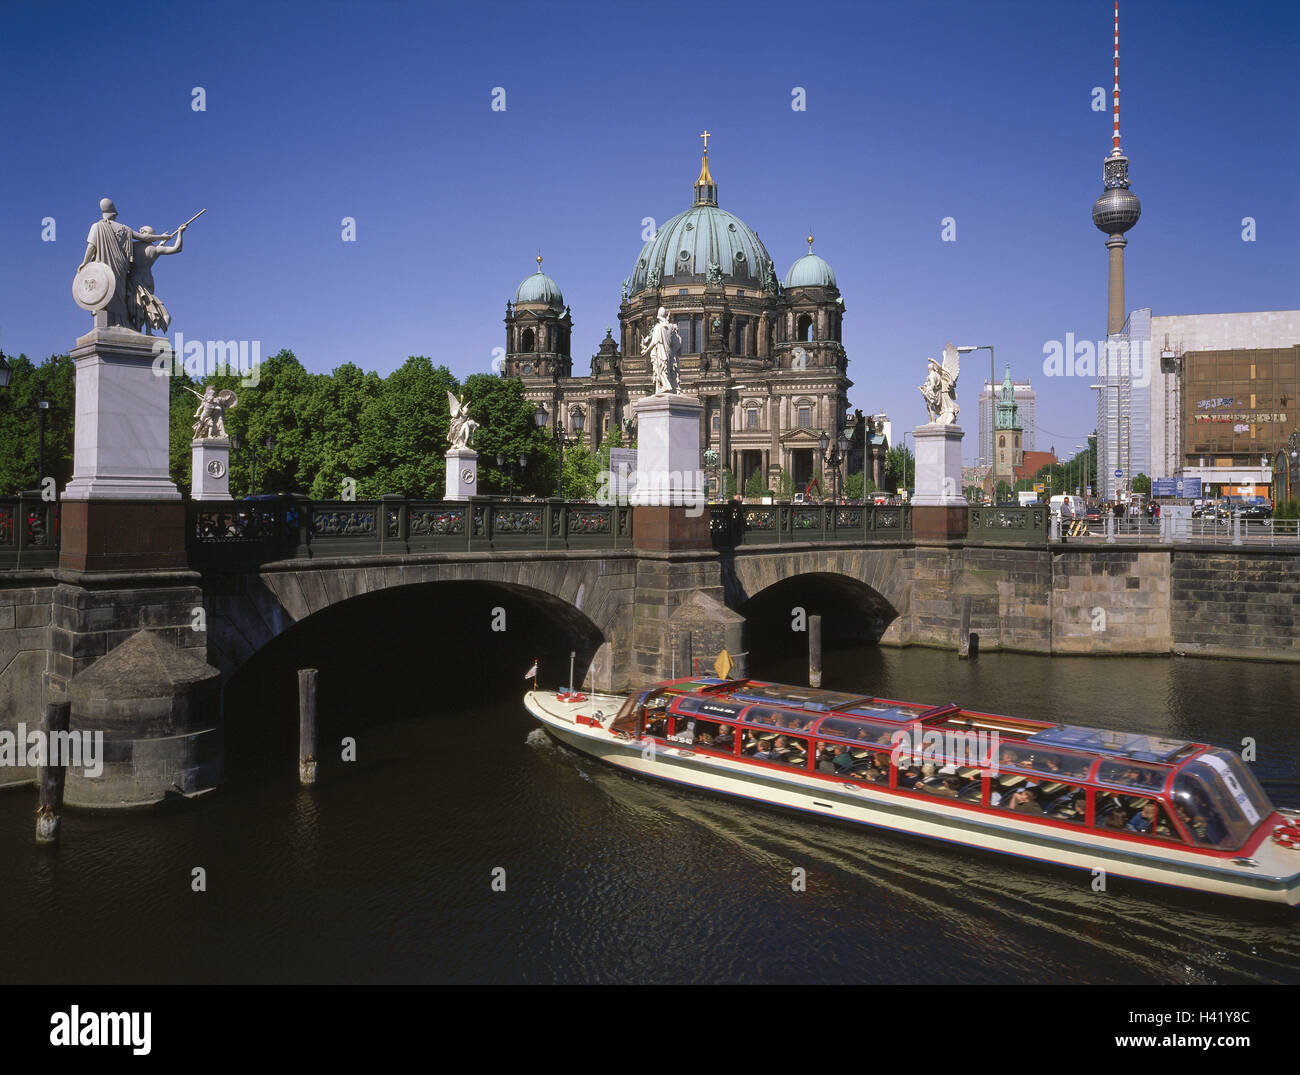 Germany, Berlin, Berlin cathedral, castle bridge, the Spree, Europe, capital, town, cathedral, main church, church, building, structure, architectural style, architecture, builds in 1894-1905, Julius Raschdorff, architecture, landmark, place of interest, bridge, sculptures, river, excursion boat, tourism Stock Photo